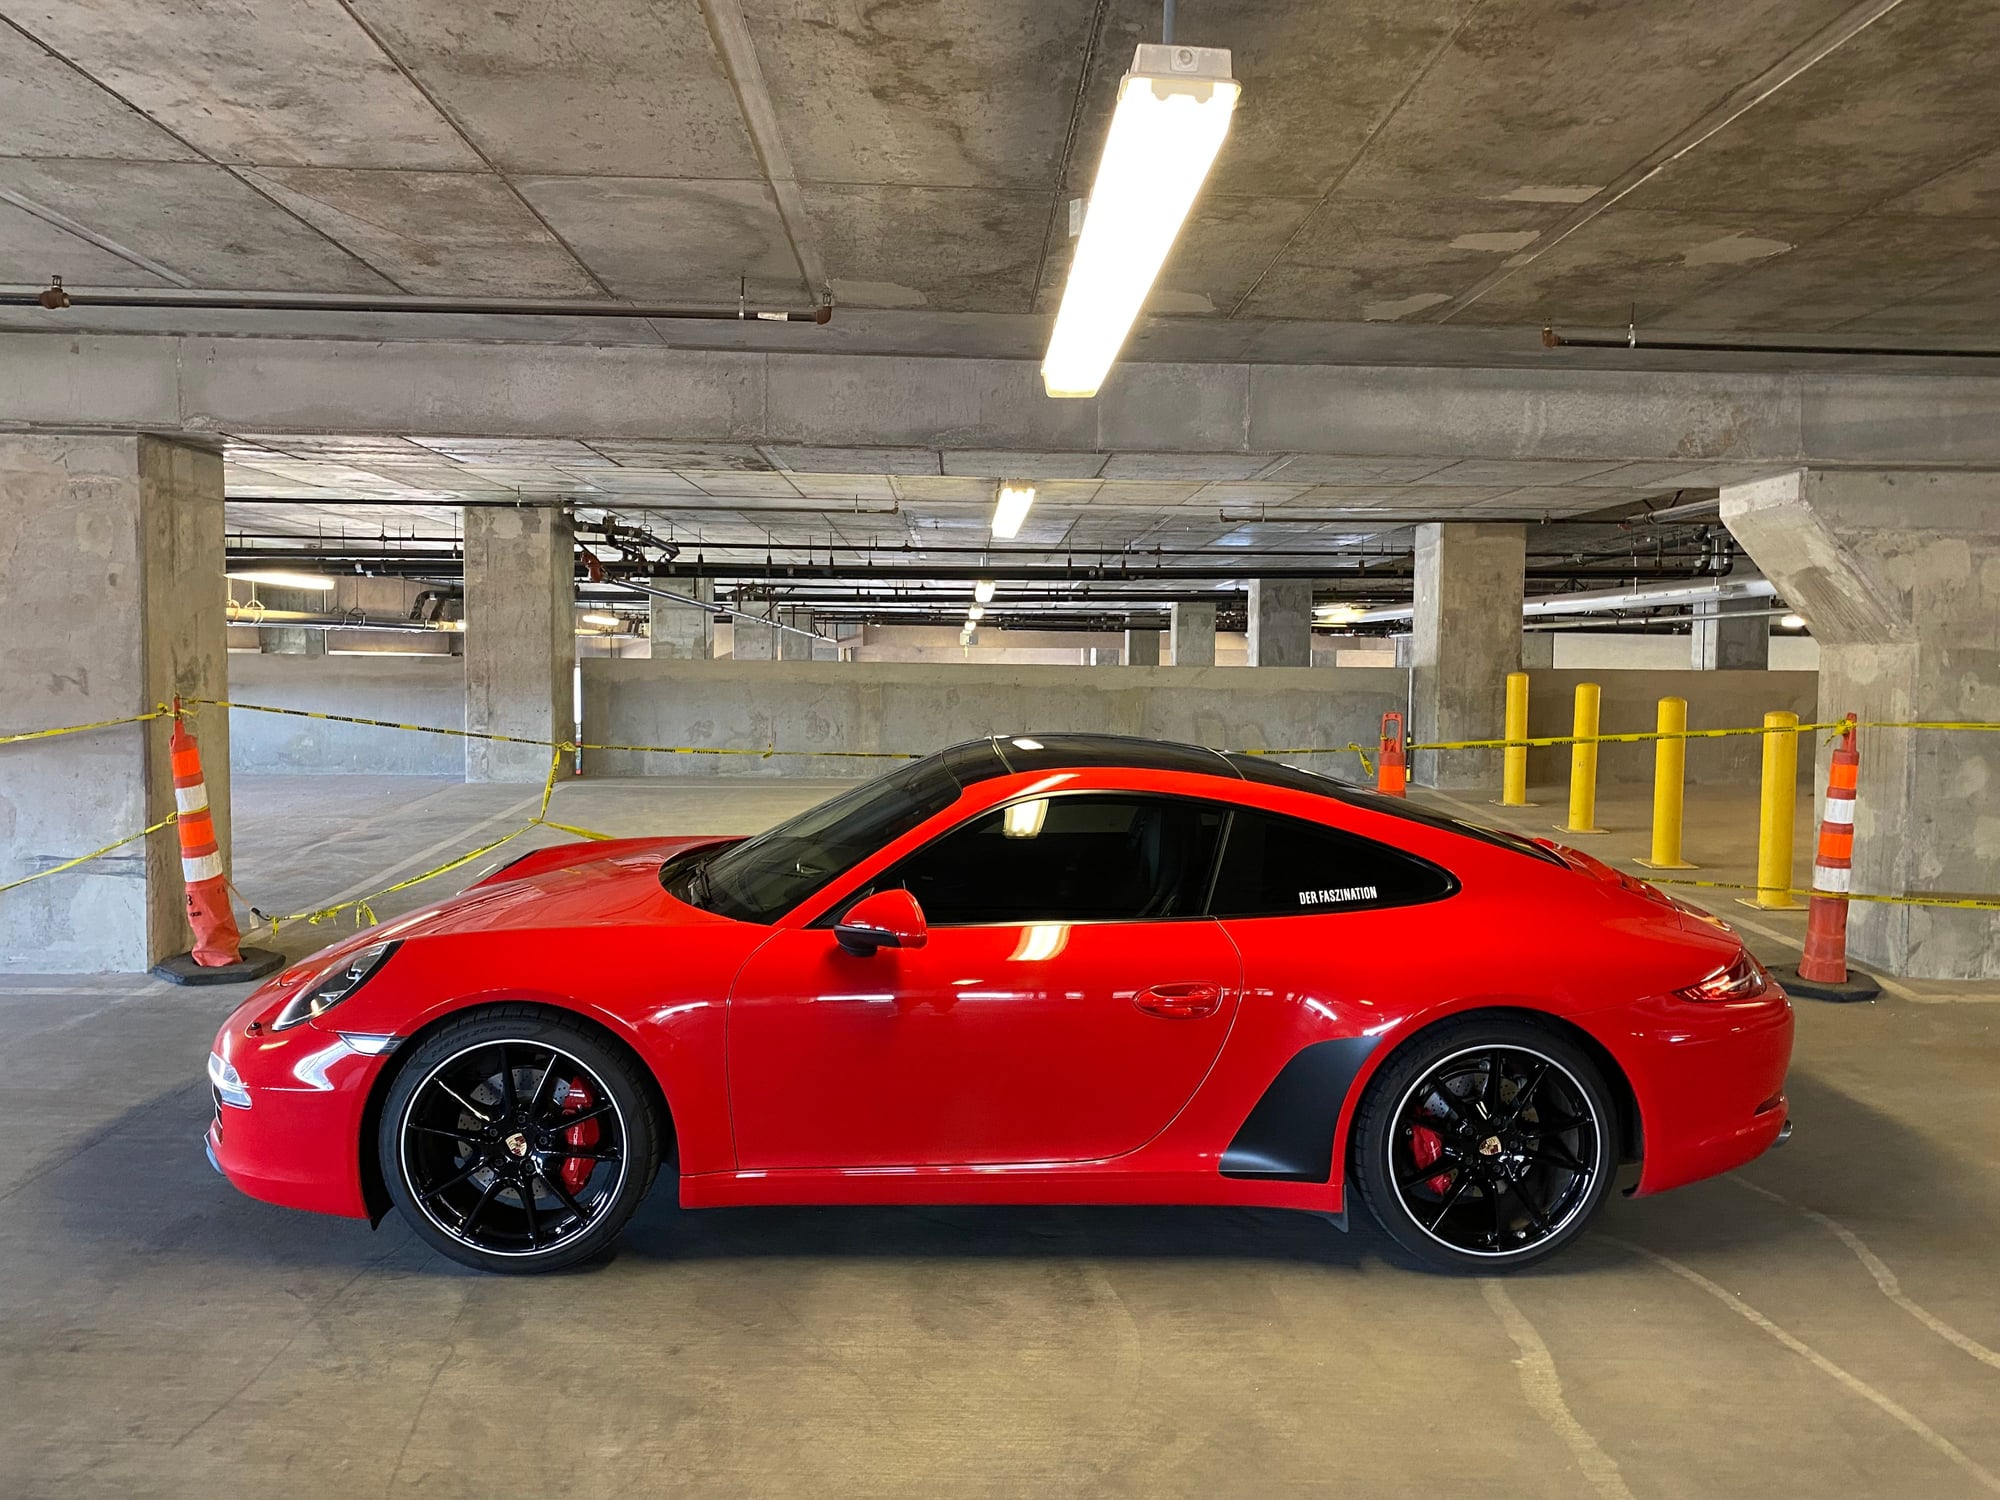 2014 Porsche 911 - 2014 Porsche 991S Manual - Used - VIN WP0AB2A90ES120352 - 61,000 Miles - 6 cyl - 2WD - Manual - Coupe - Red - Las Vegas, NV 89101, United States